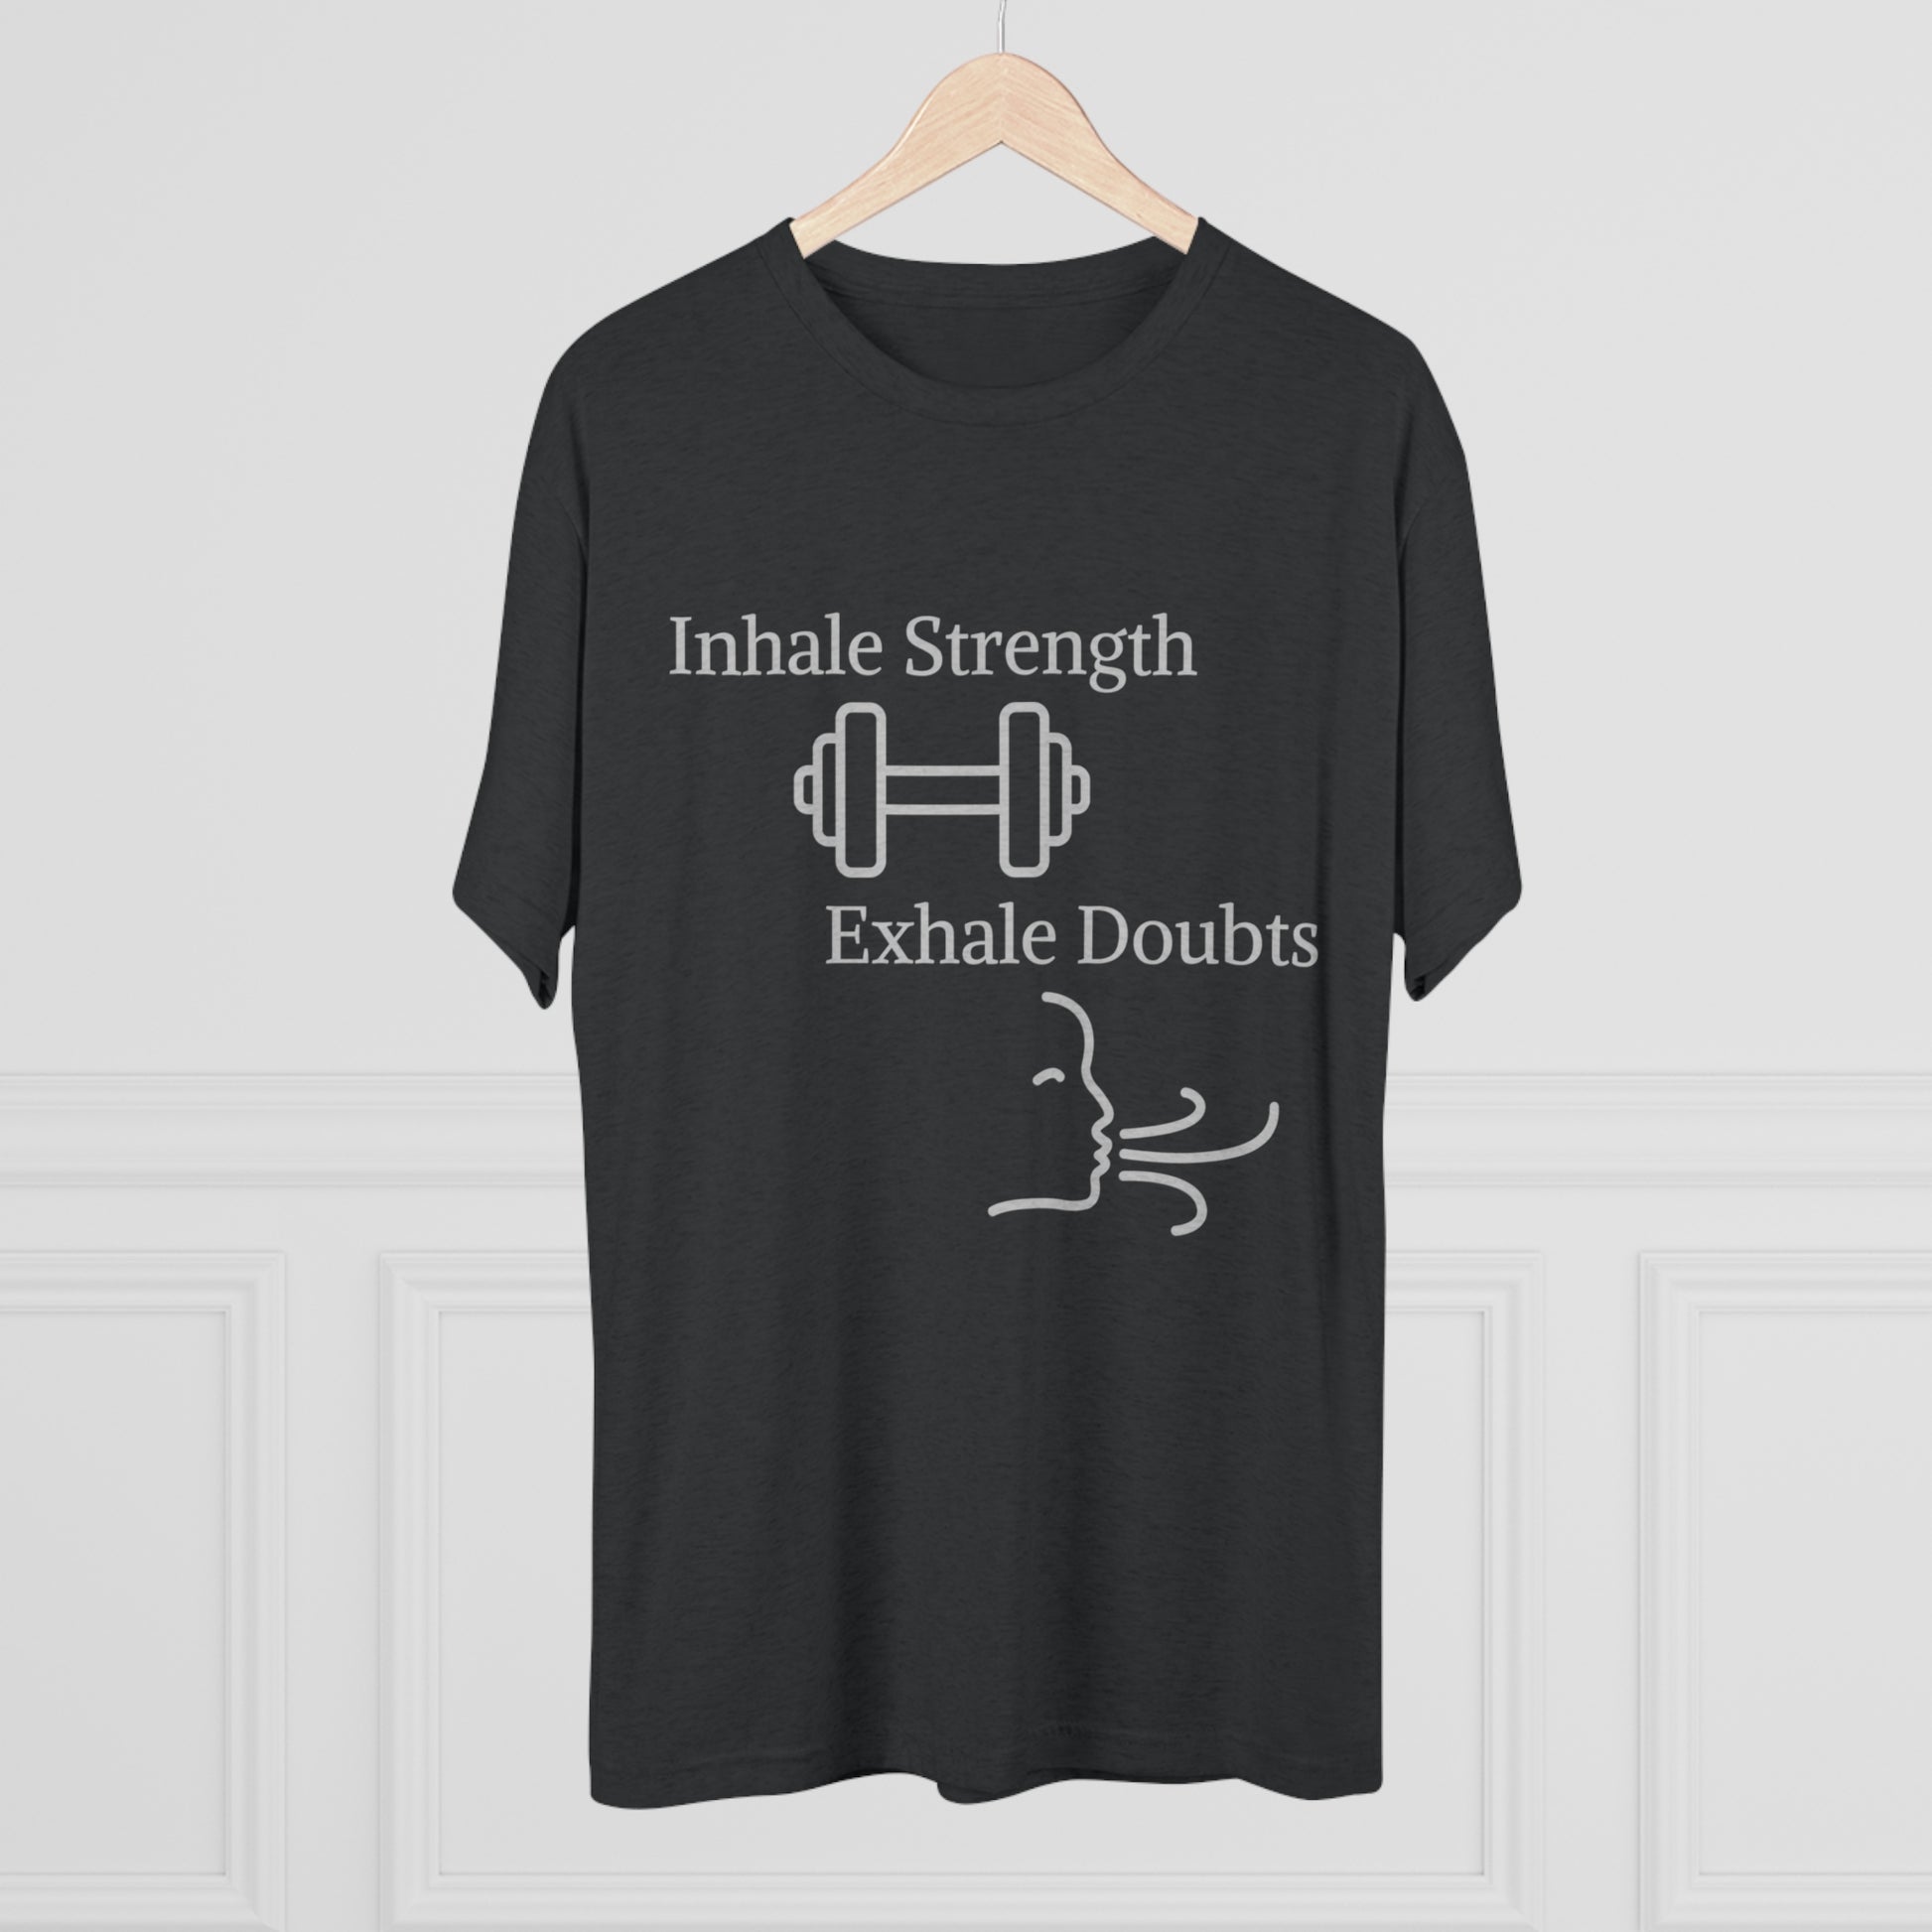 Printify's "Inhale Strength Exhale Doubt w Images" unisex tri-blend crew tee featuring black t-shirt with white text, a dumbbell image, and a stylized face exhaling.